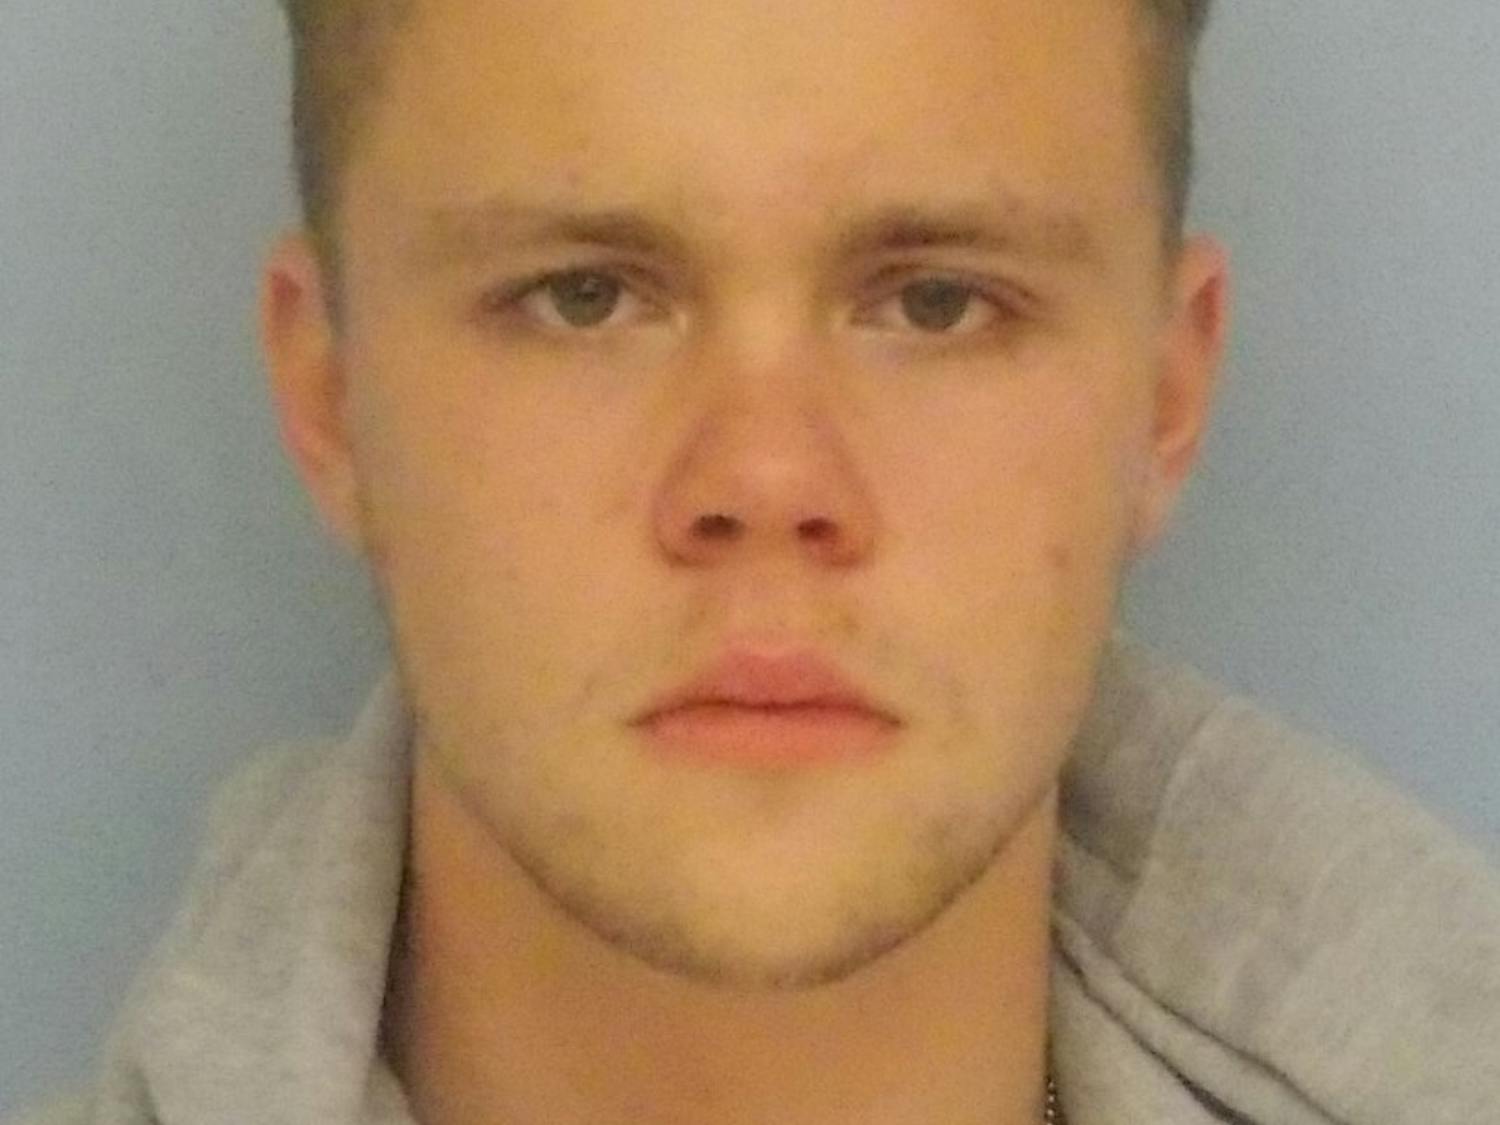 Auburn police arrested Mackenzie Anderson Pampu, 19, from Helena, Alabama, Friday on warrants charging him with fourth-degree burglary and fourth-degree theft of property.